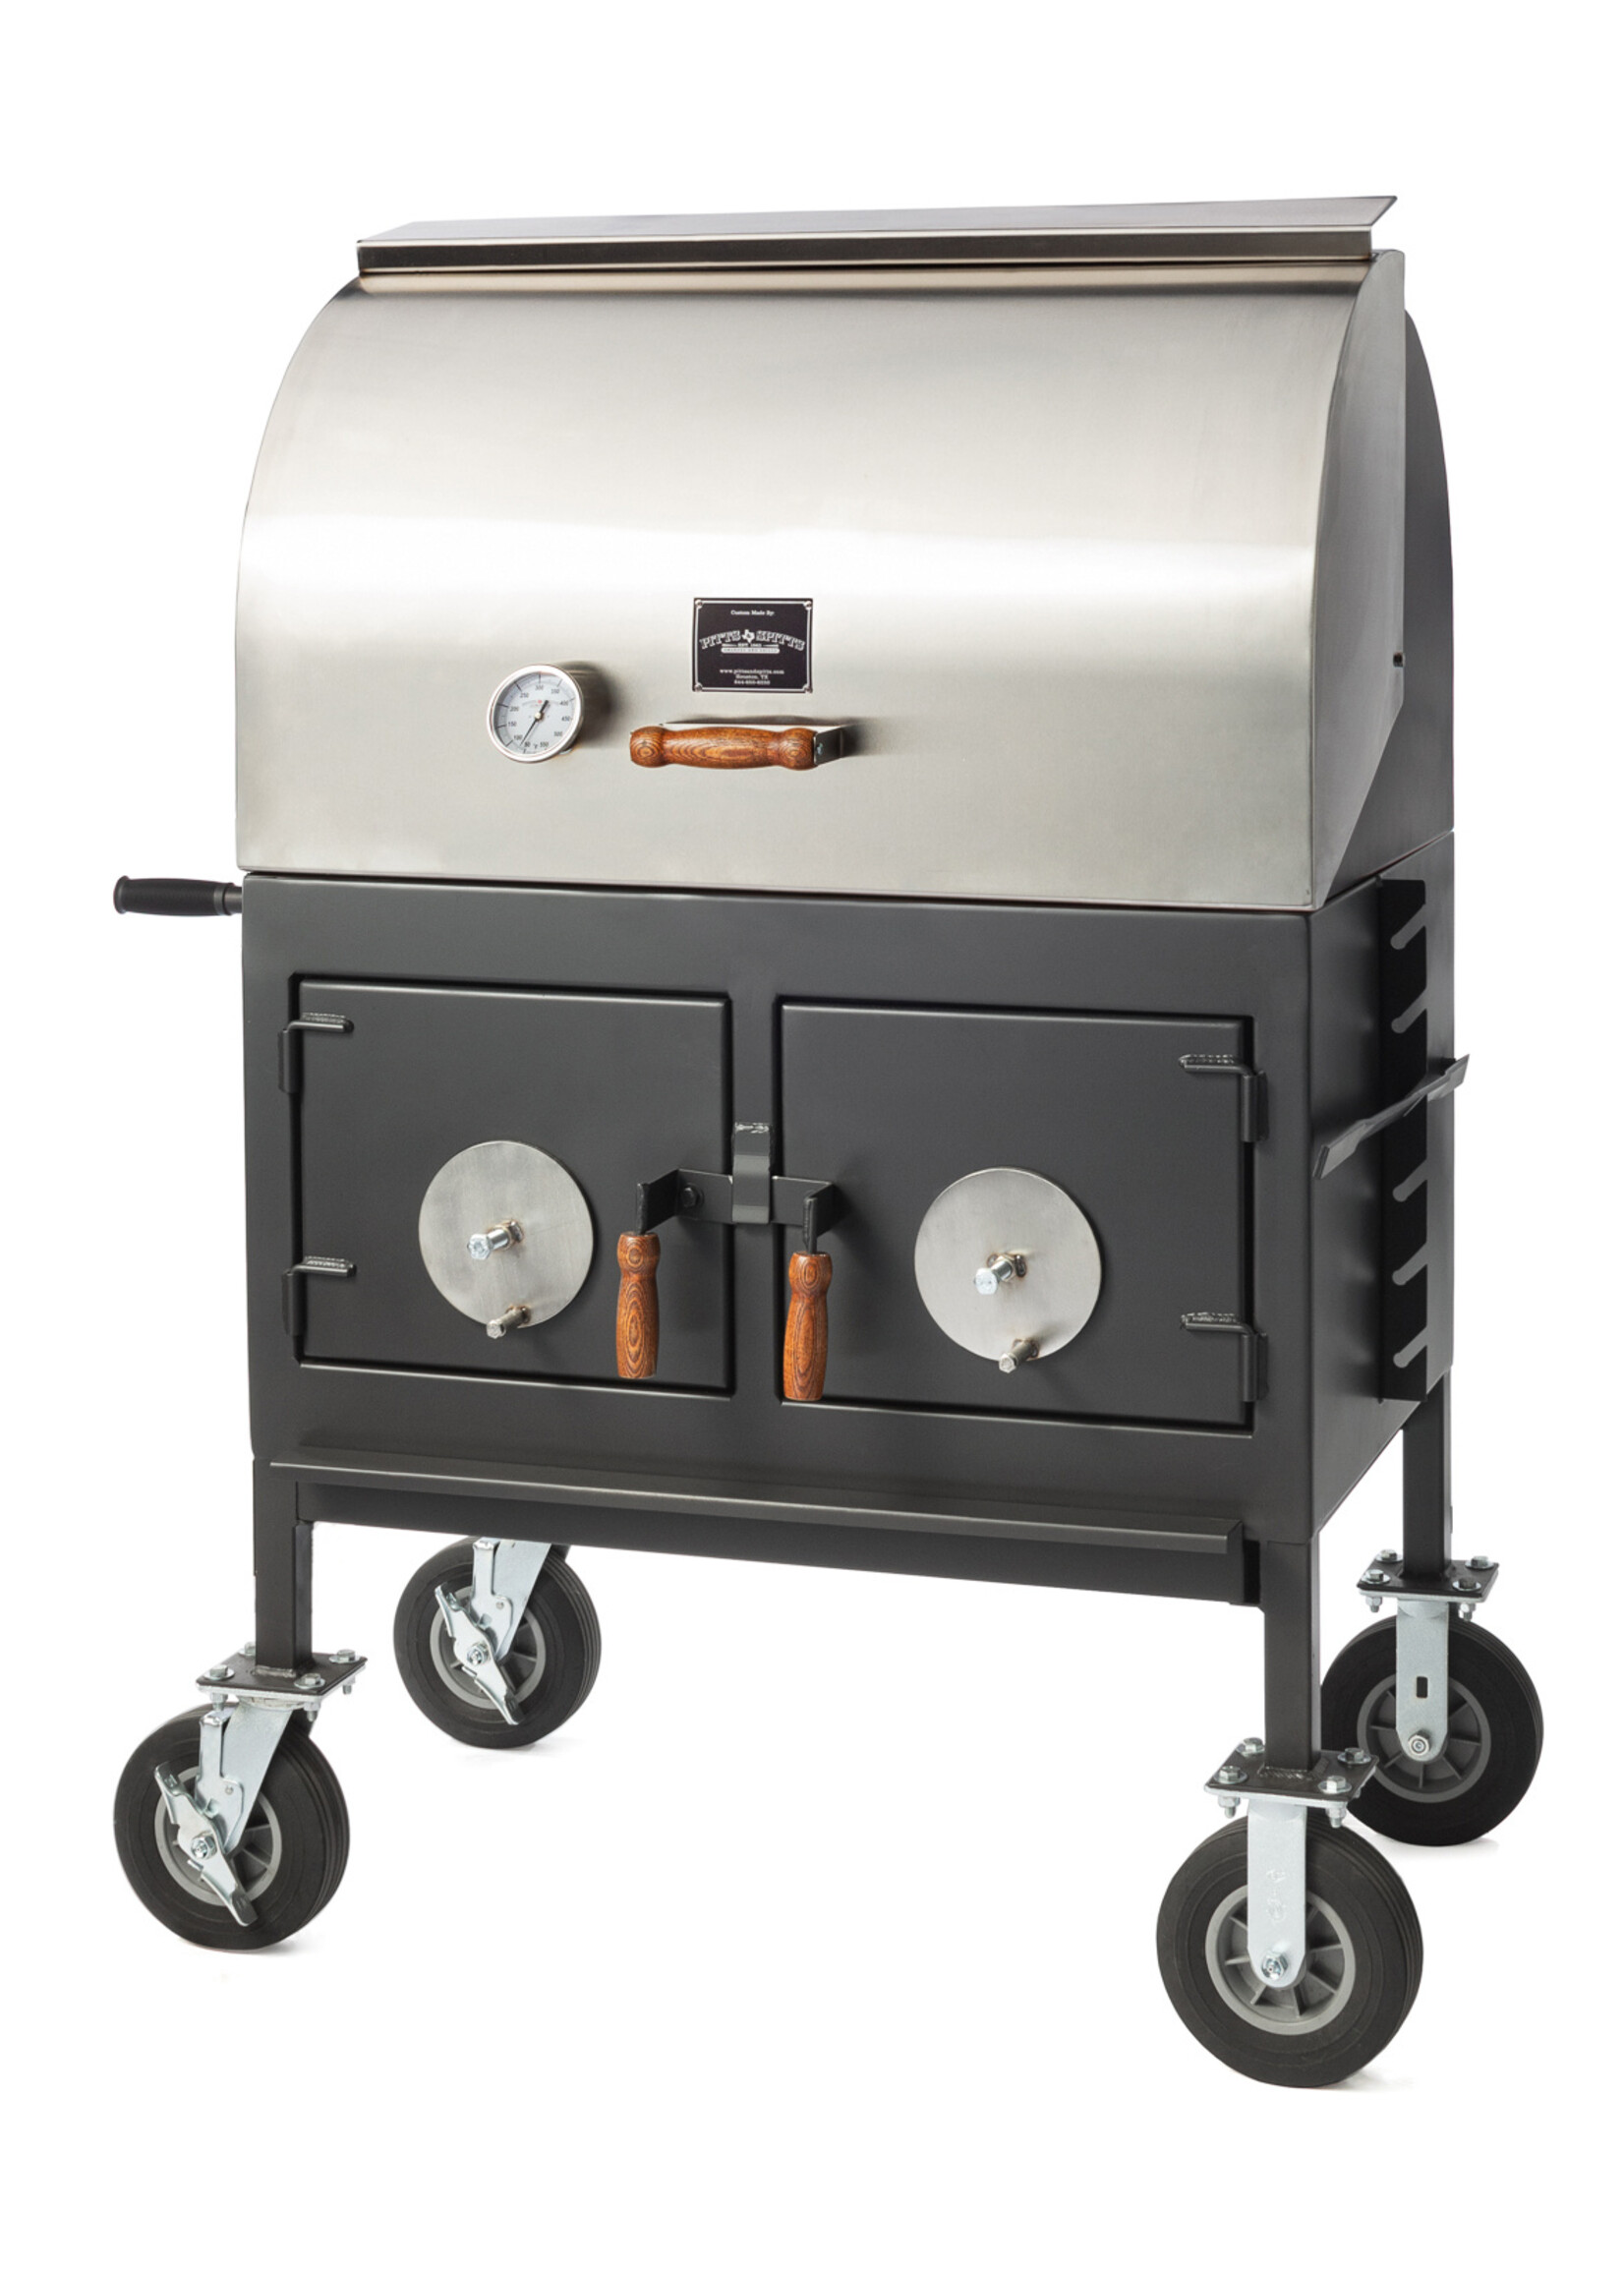 Pitts & Spitts Pitts & Spitts Charcoal Roll Top Grill